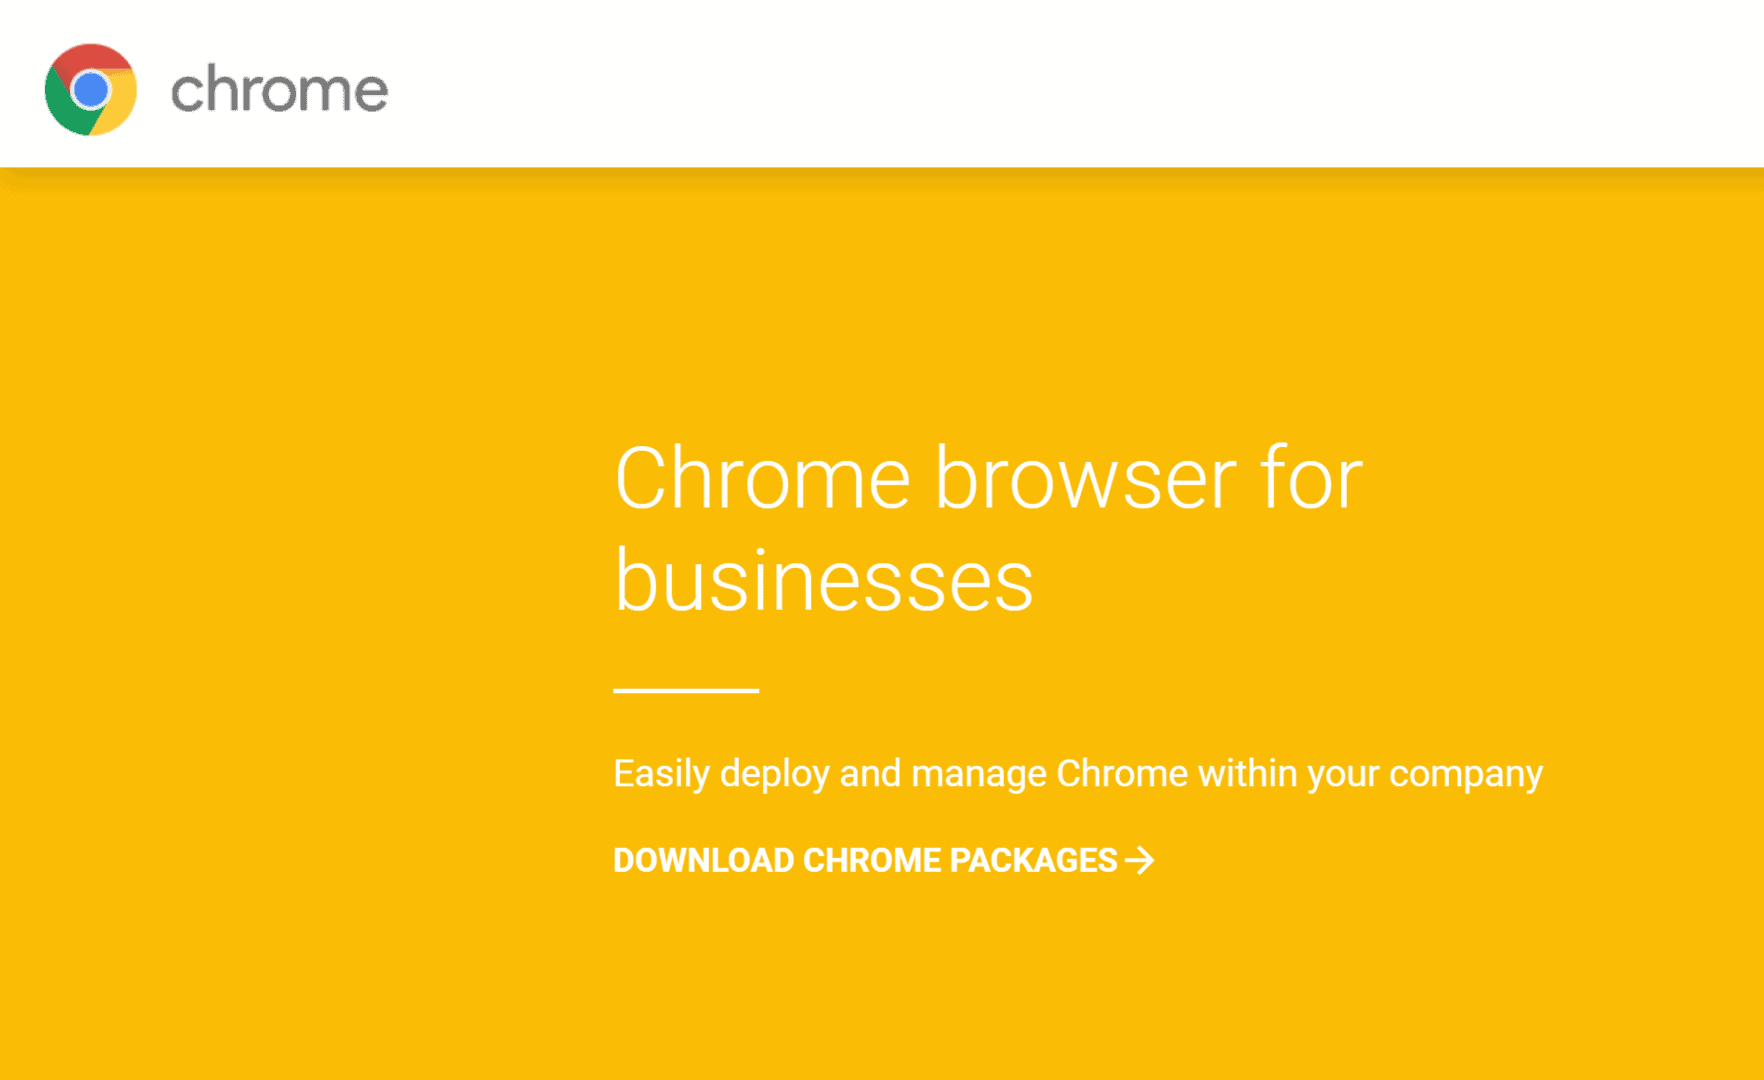 Chrome Adds More Security for Business Users